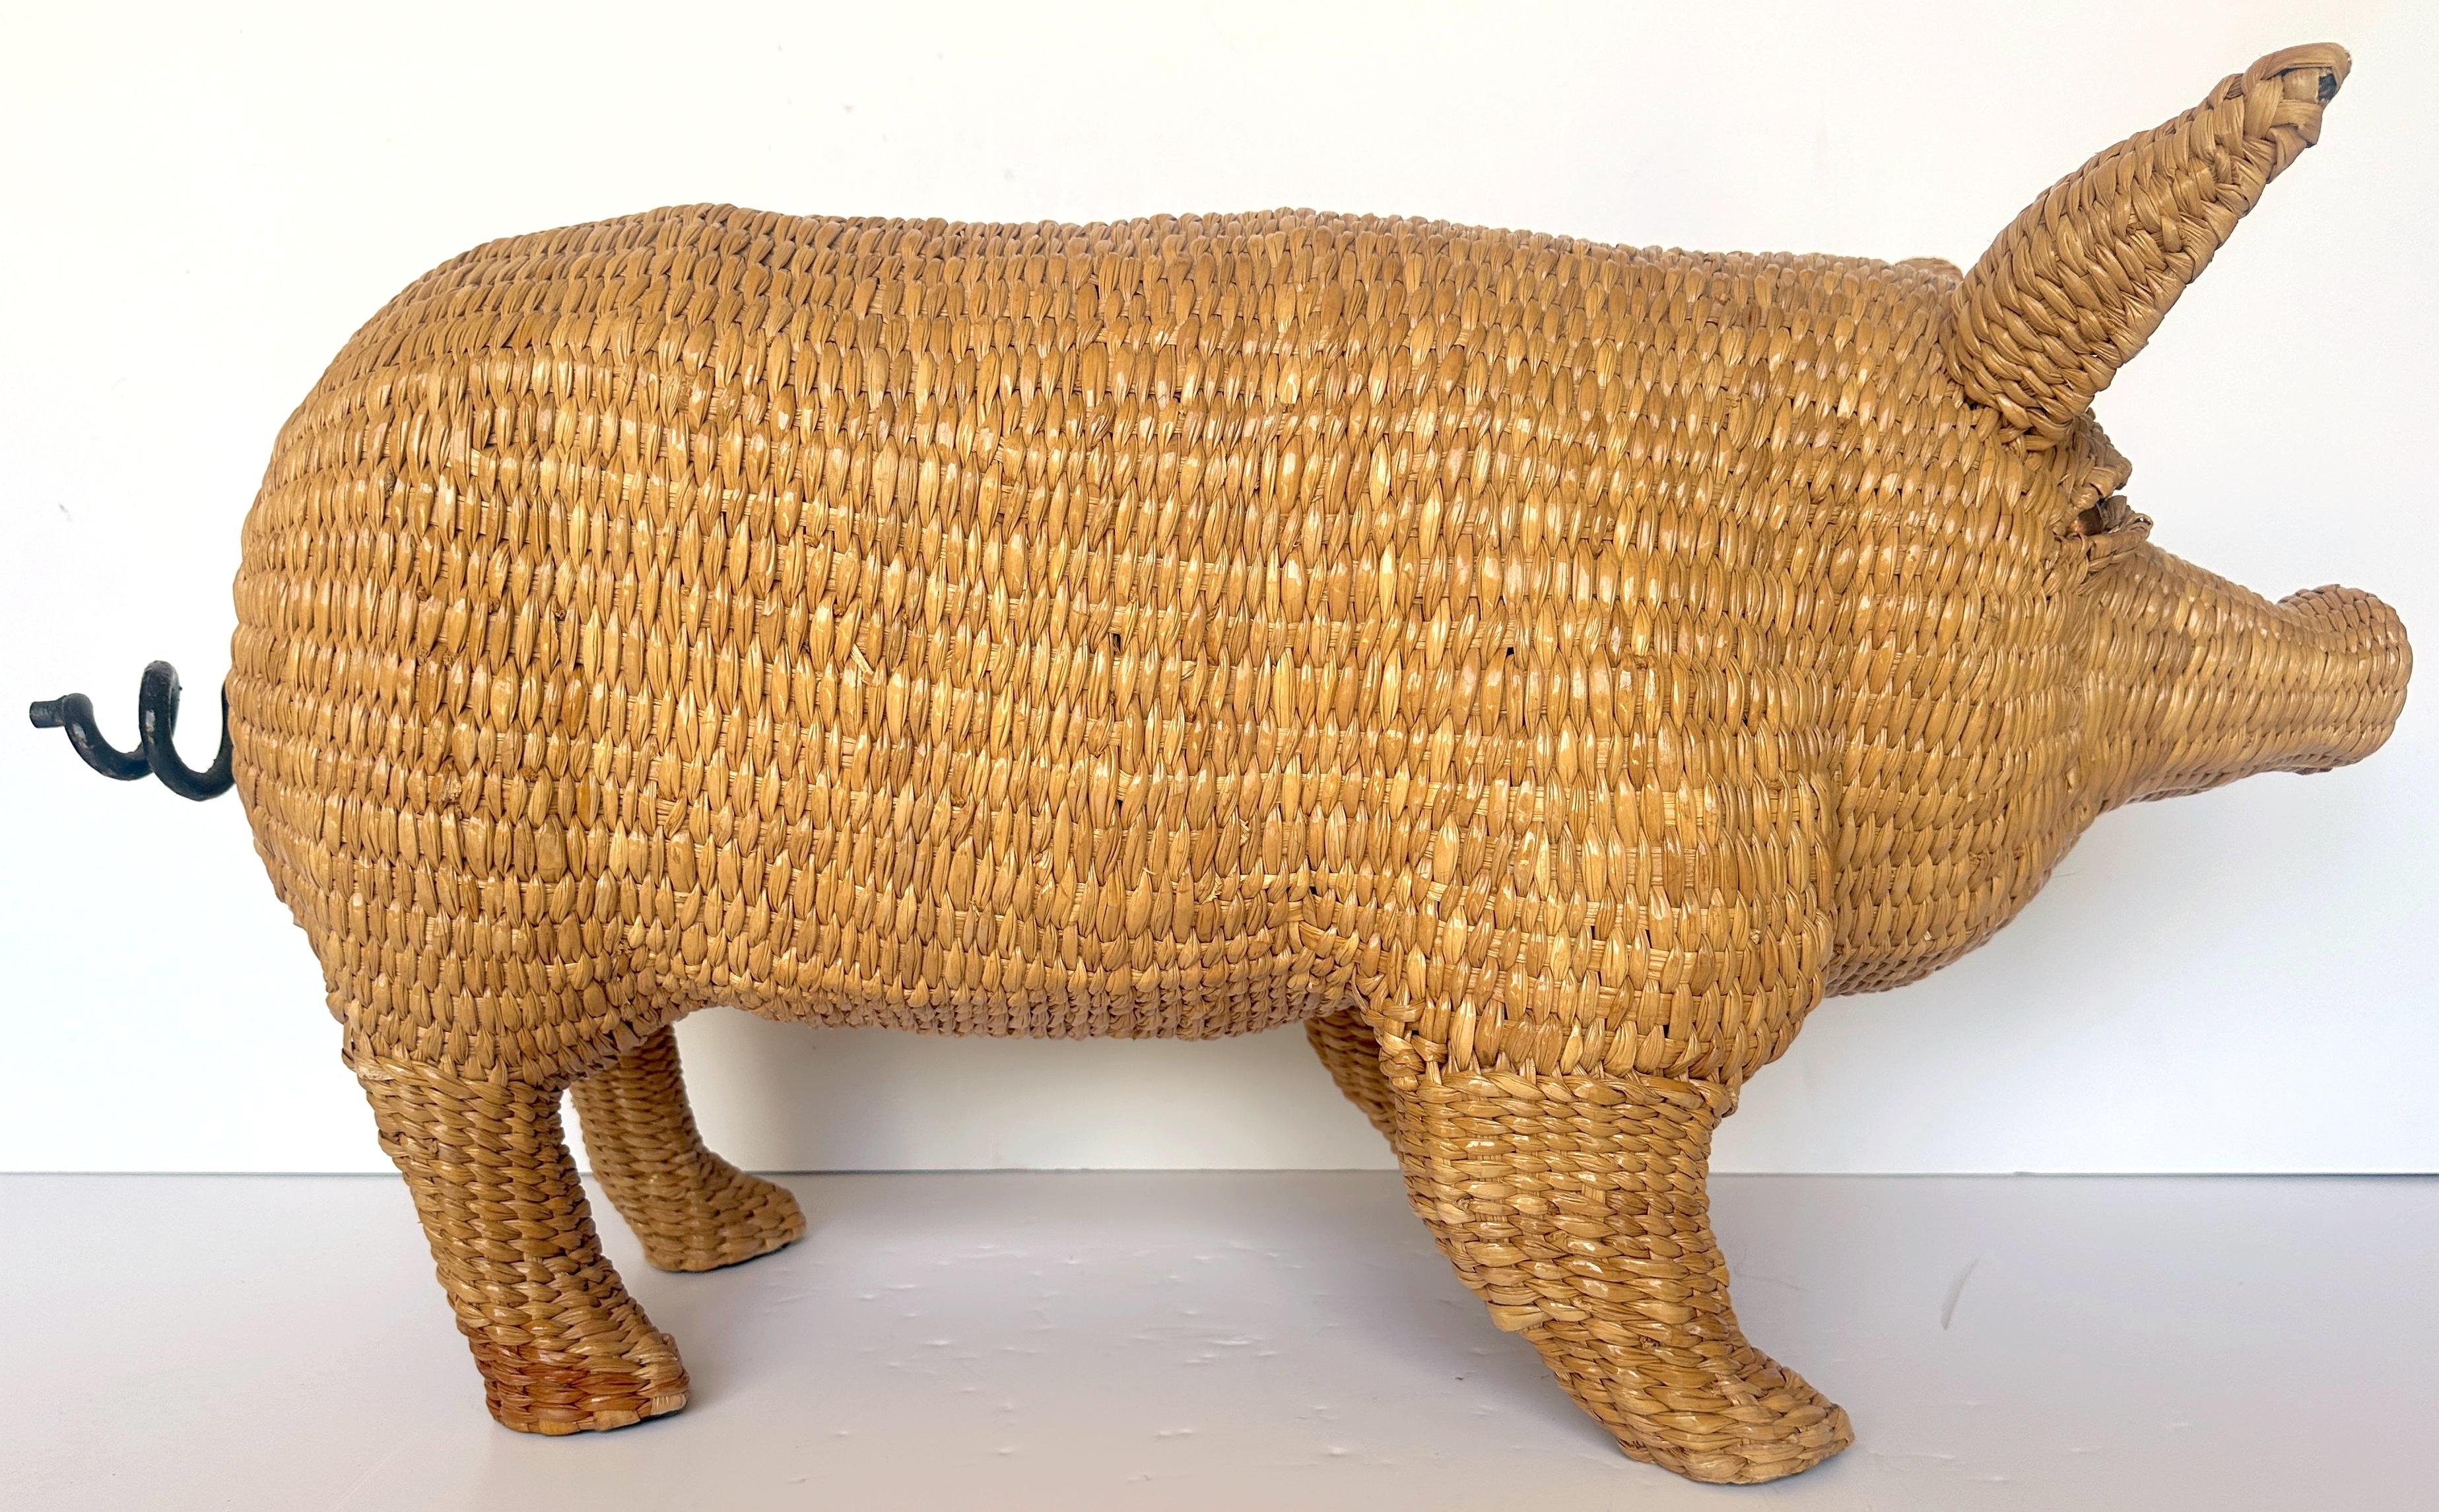 Mario Lopez Torres Pig Sculpture, Signed, 1970s

An exquisite vintage Mario Lopez Torres Pig Sculpture, signed and dated circa 1970s, exudes charm and character. Crafted of woven wicker, this near-life-size pig sculpture features intricately